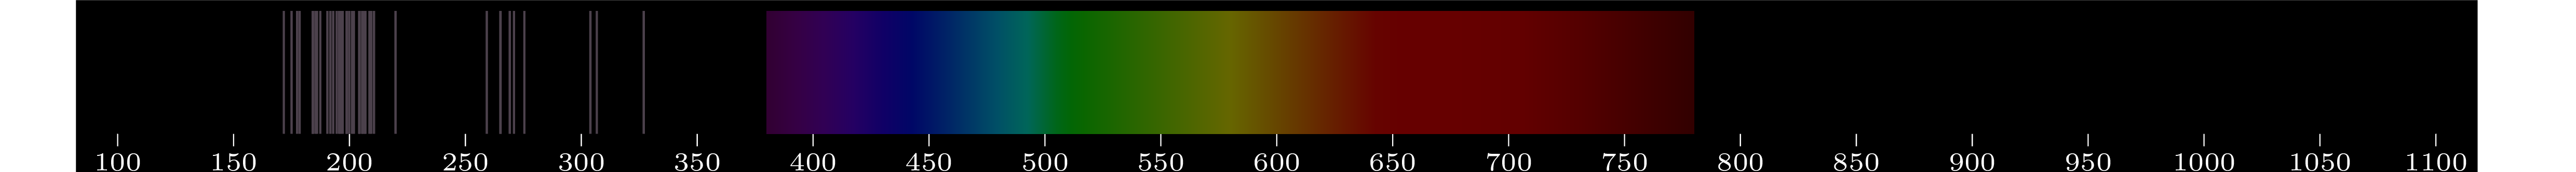 emmision spectra of element Ge